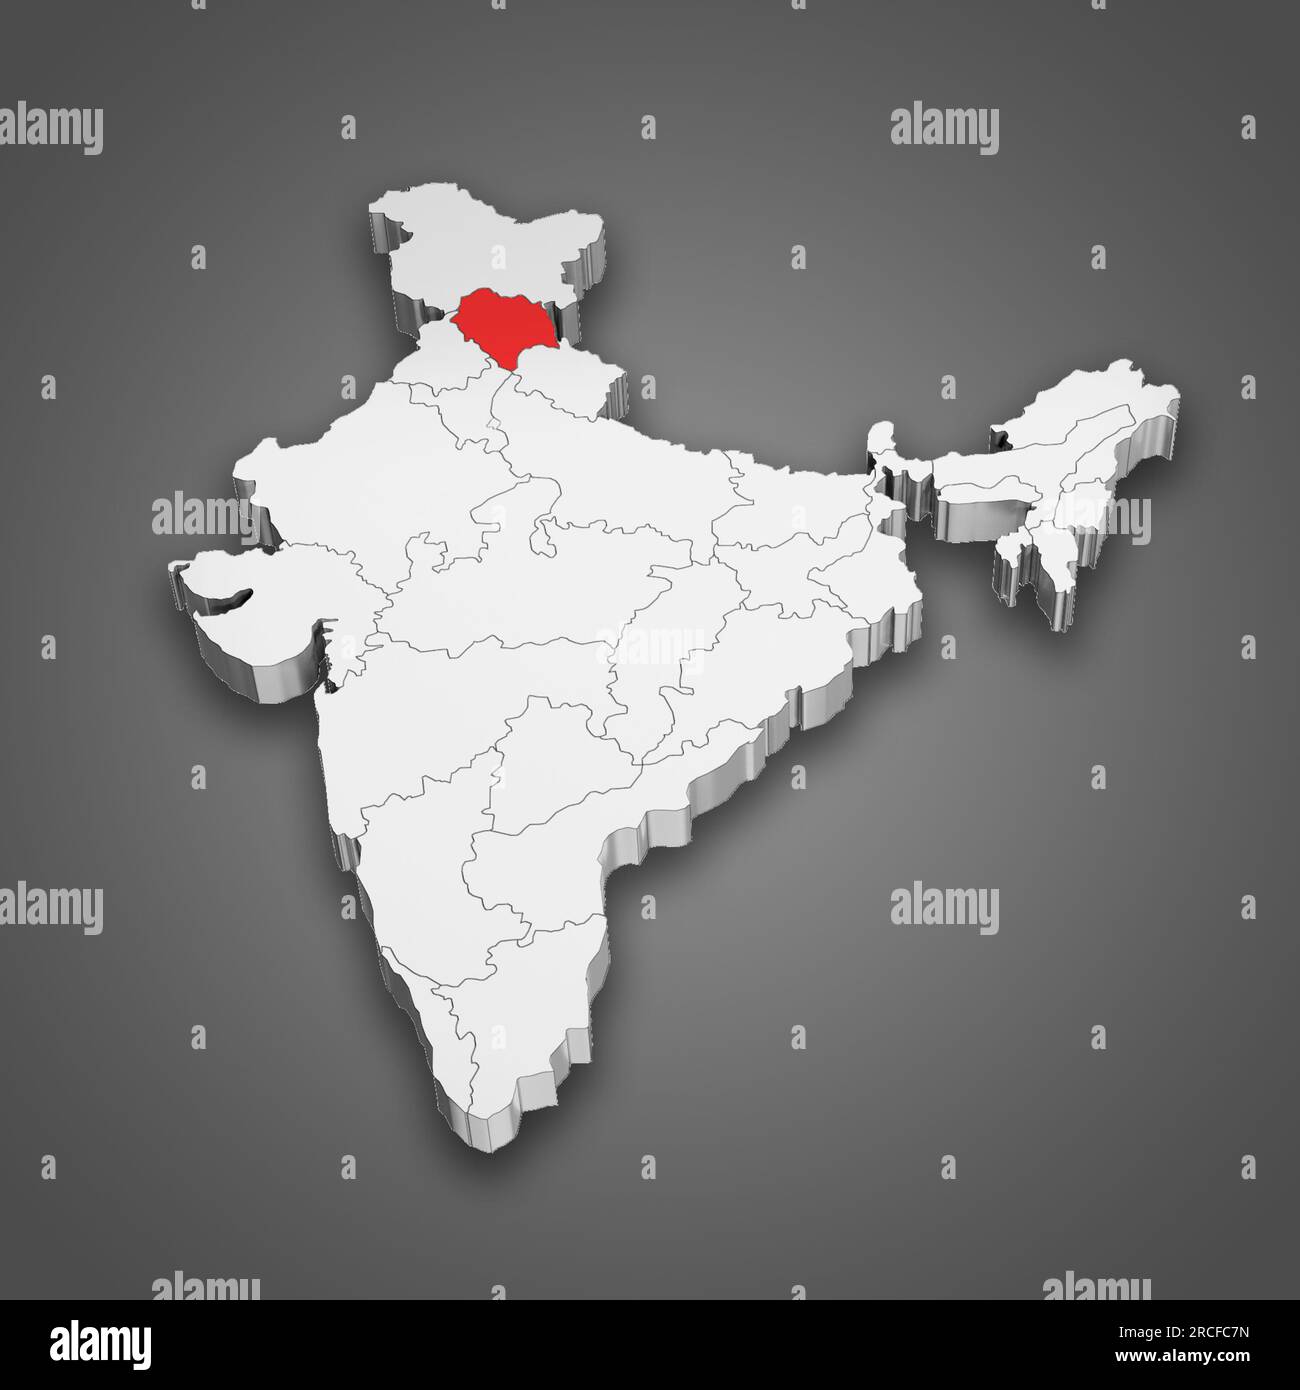 Himachal Pradesh state location within India map. 3D Illustration Stock Photo